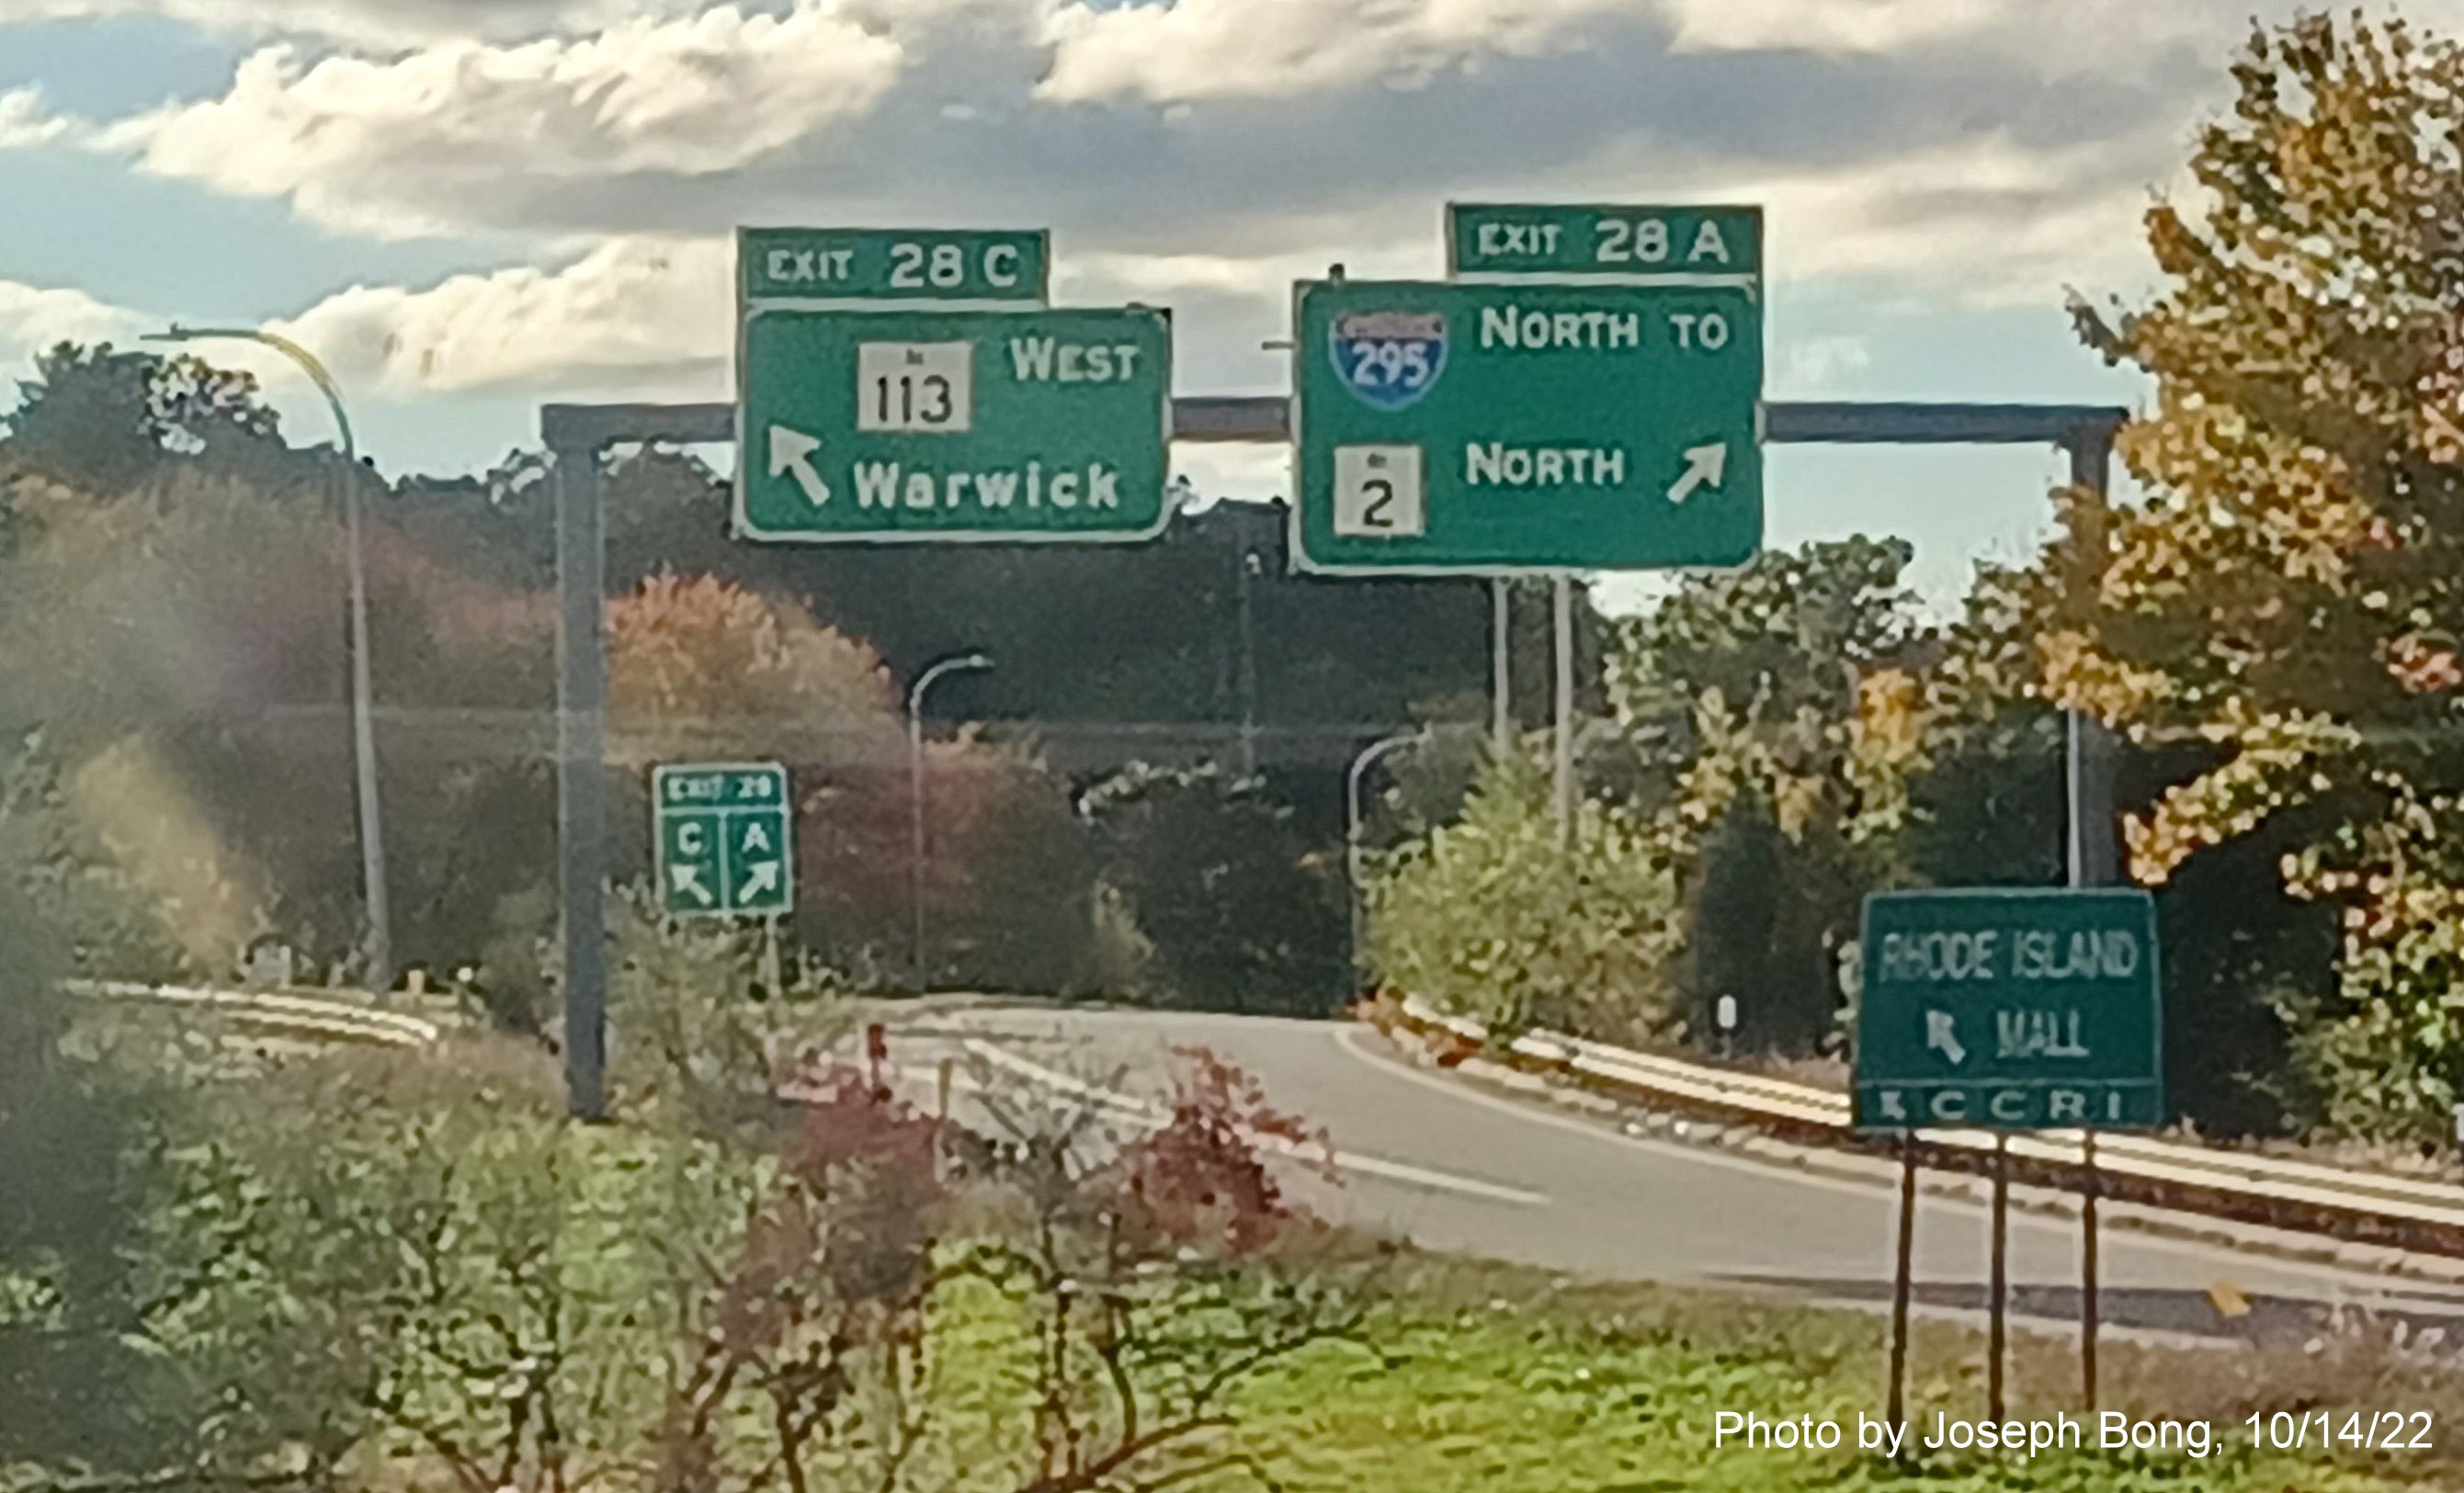 Image of overhead ramp signage for RI 113/To I-295 North exits with new milepost based exit numbers, by Joseph Bong October 2022